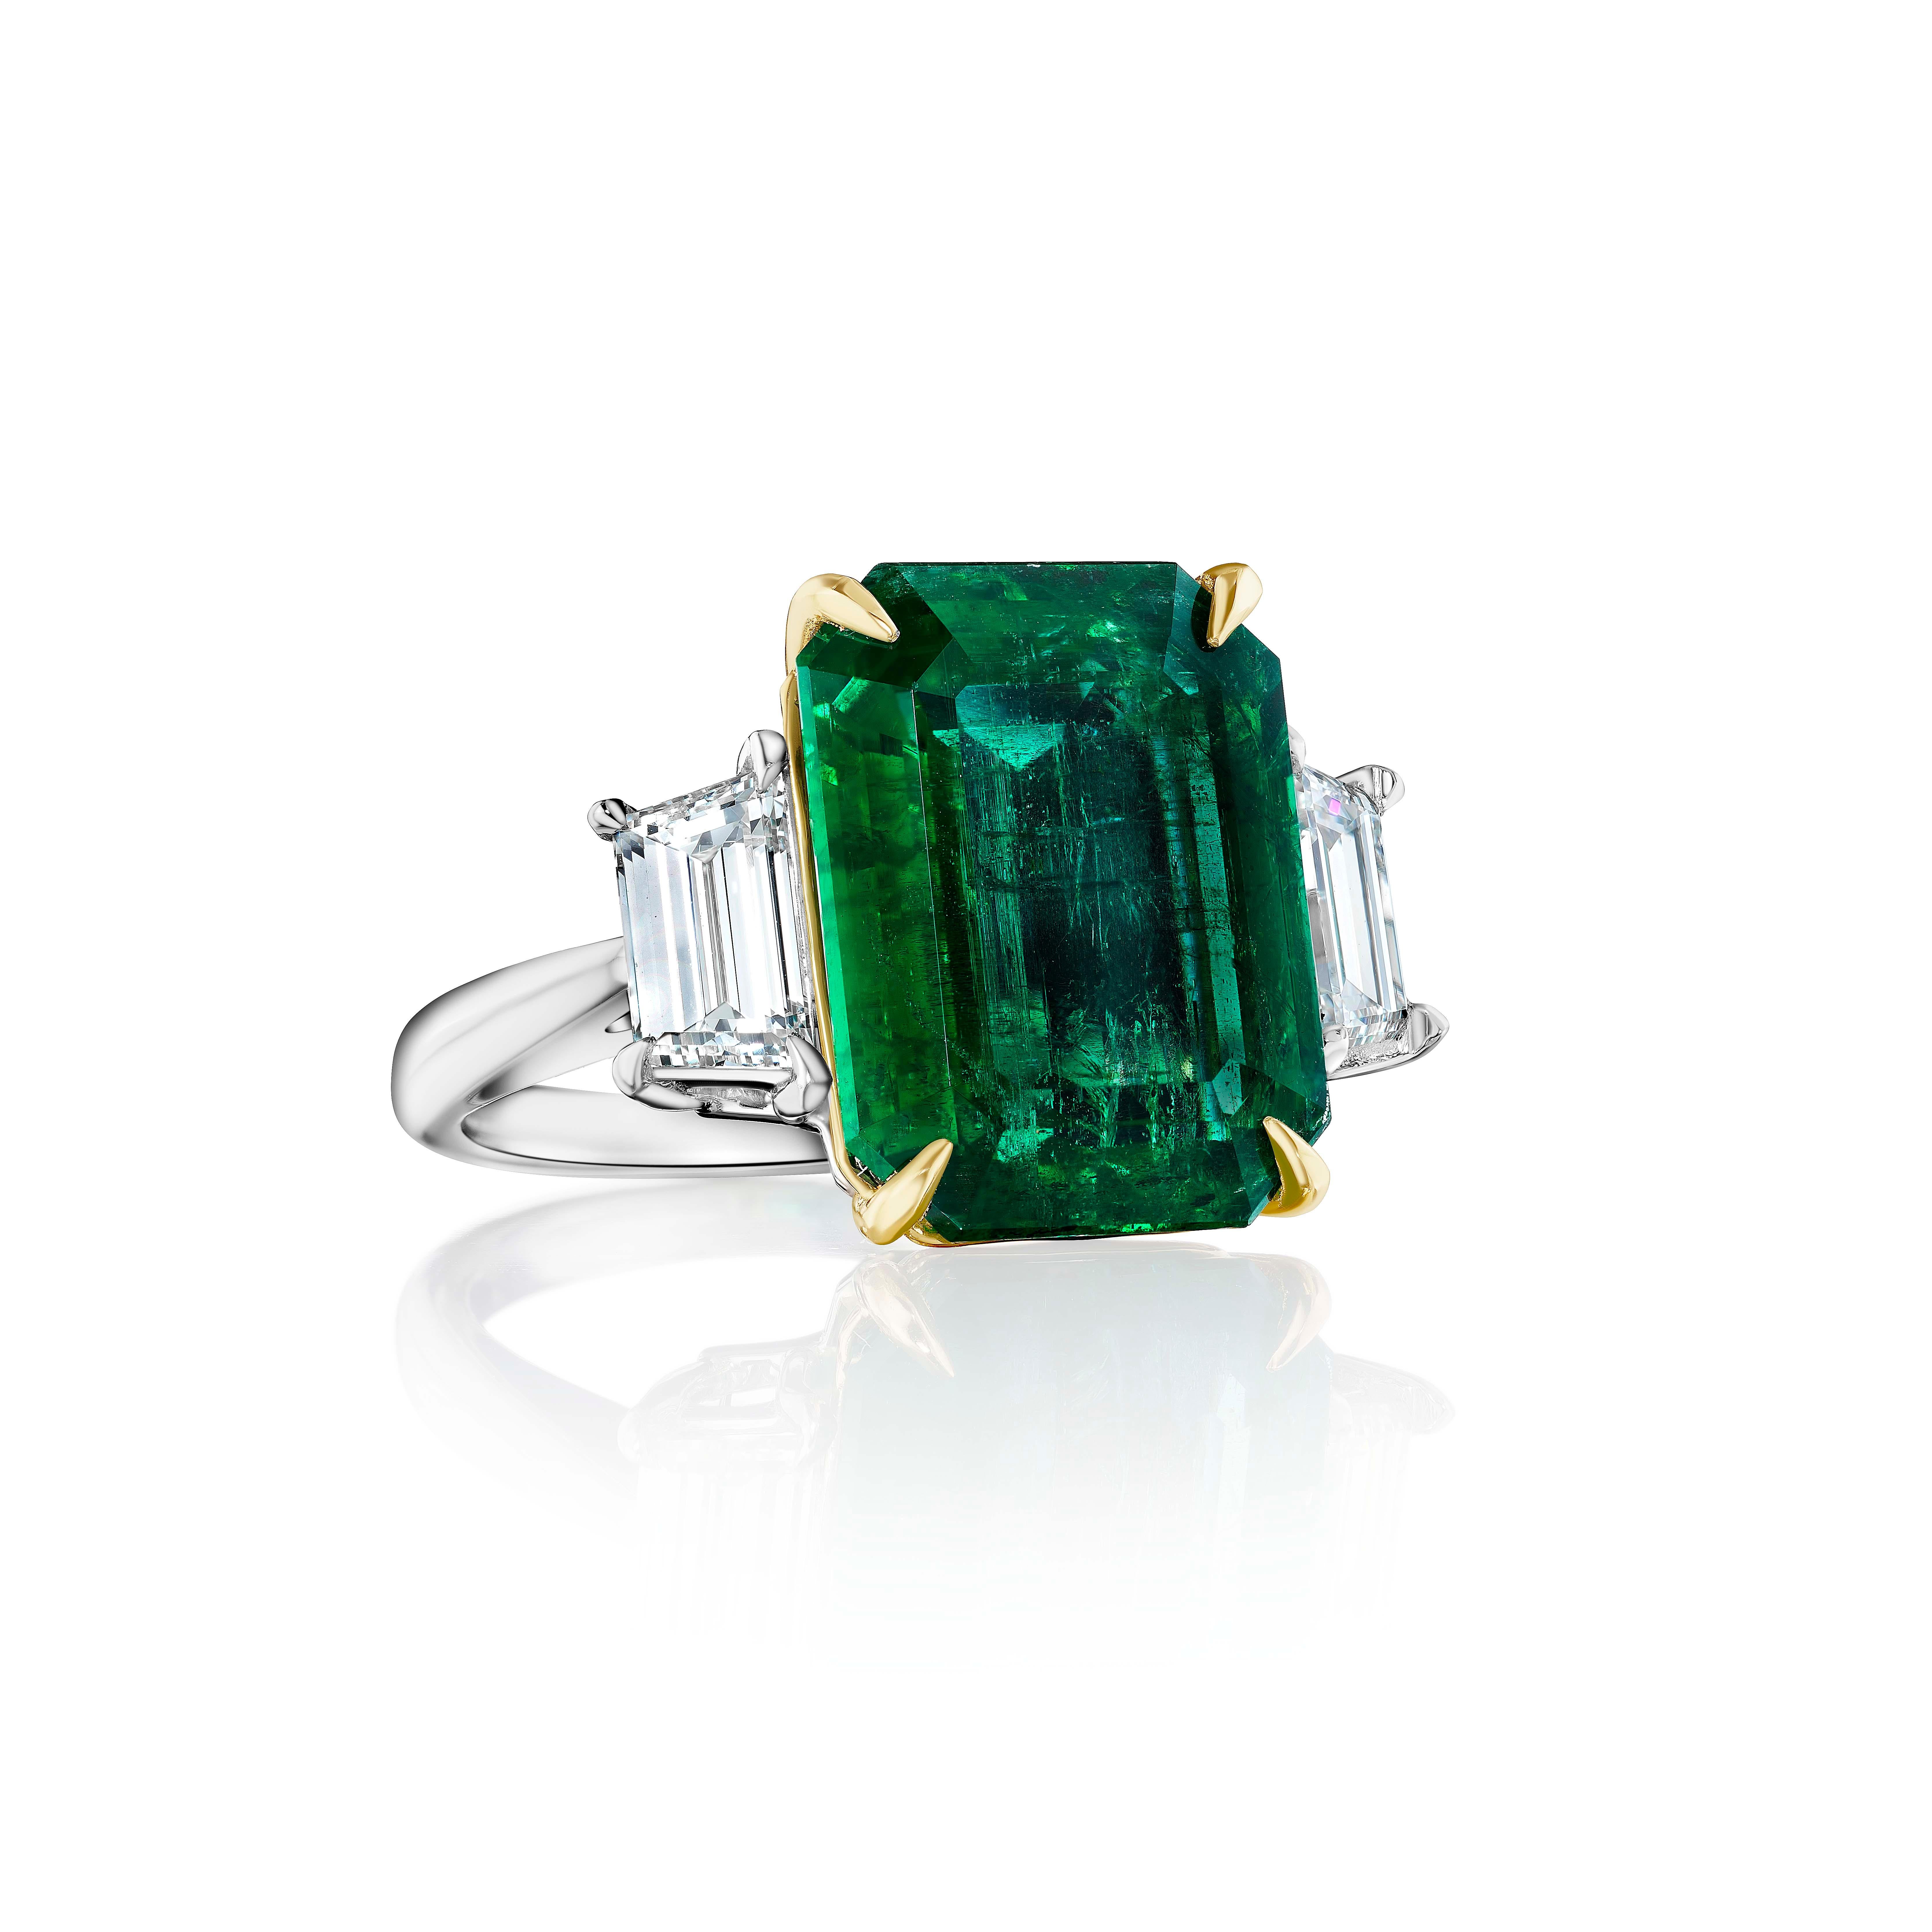 Centered upon a Emerald Cut Emerald weighing 10.08 Carats, flanked by Step Cut Trapezoid Shaped Diamonds weighing 1.43 Carats.

Set in Platinum and 18 Karat Yellow Gold.
Size 6.5